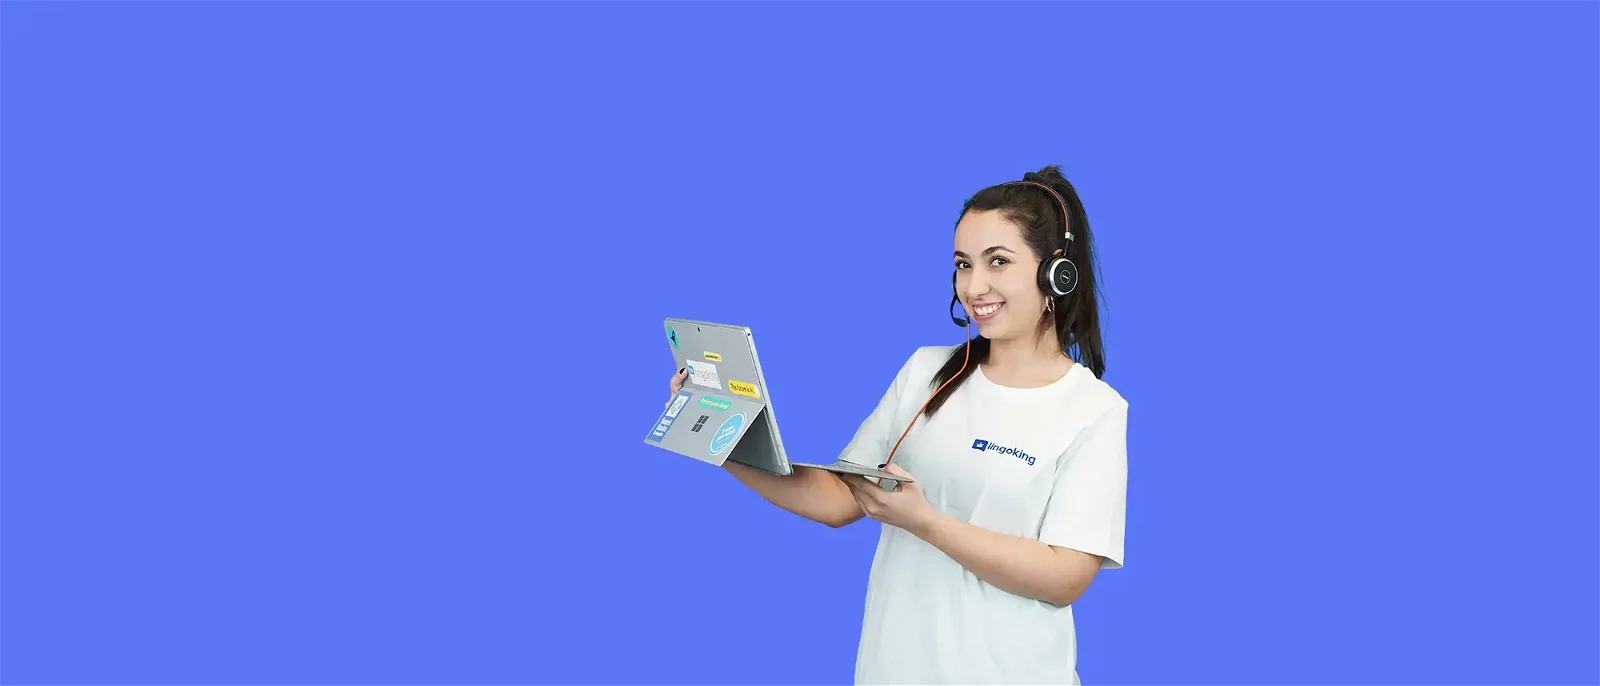 Employee of nlingoking with tablet and headset